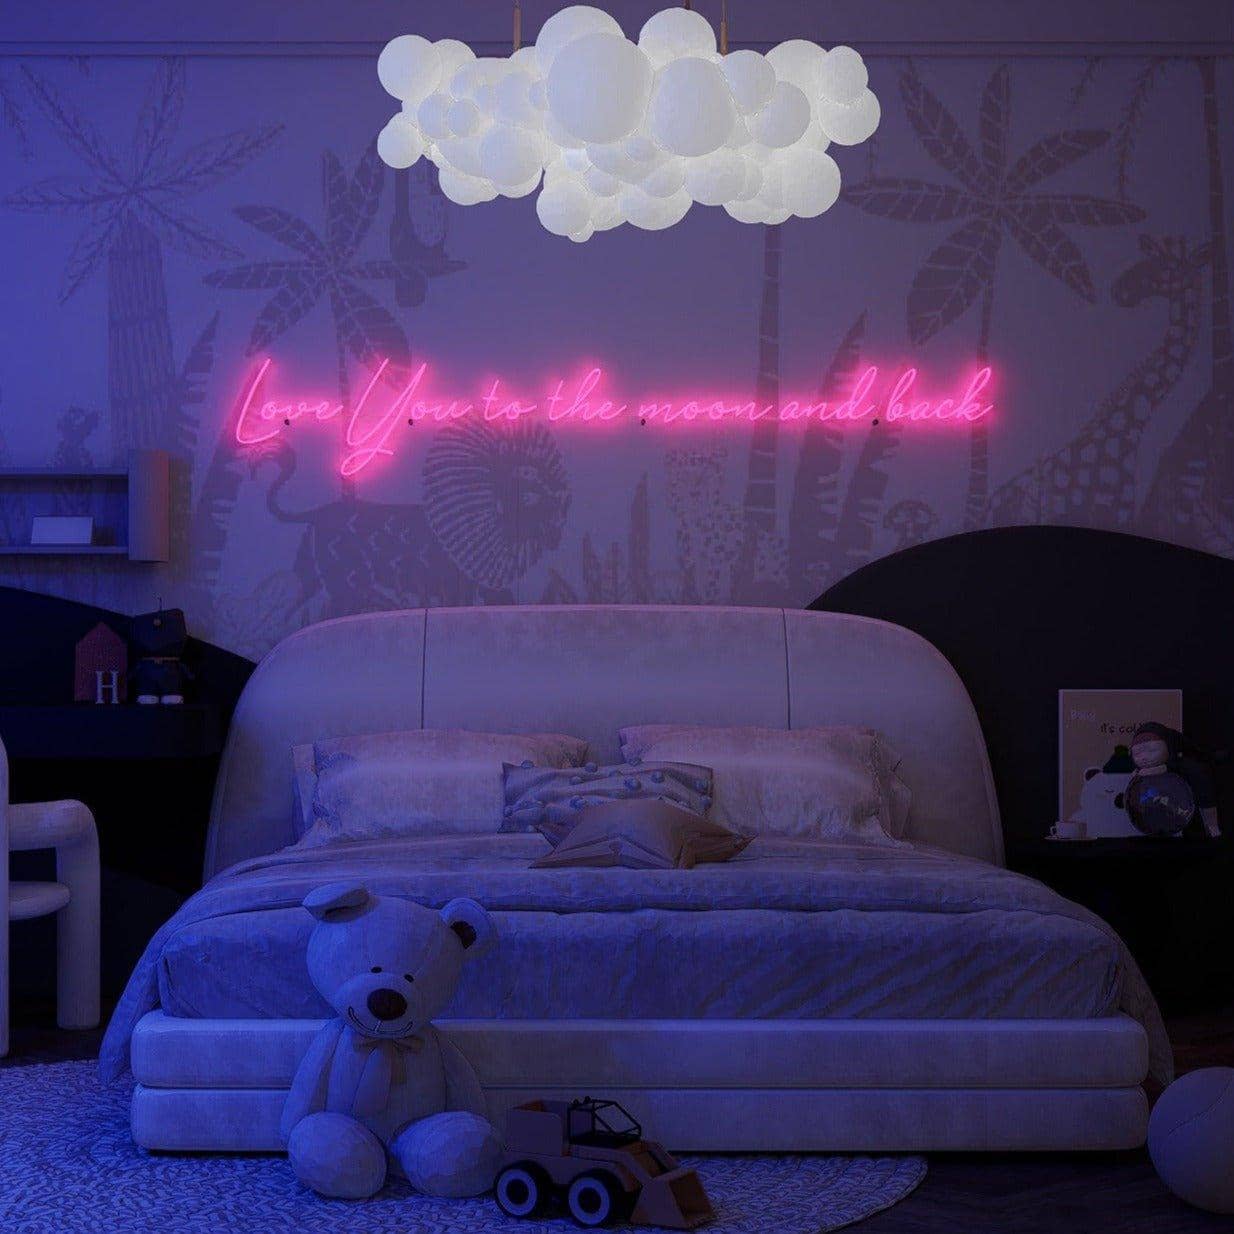 pink-neon-lights-are-lit-up-at-night-and-displayed-in-the-bedroom-love-you-to-the-moon-and-back